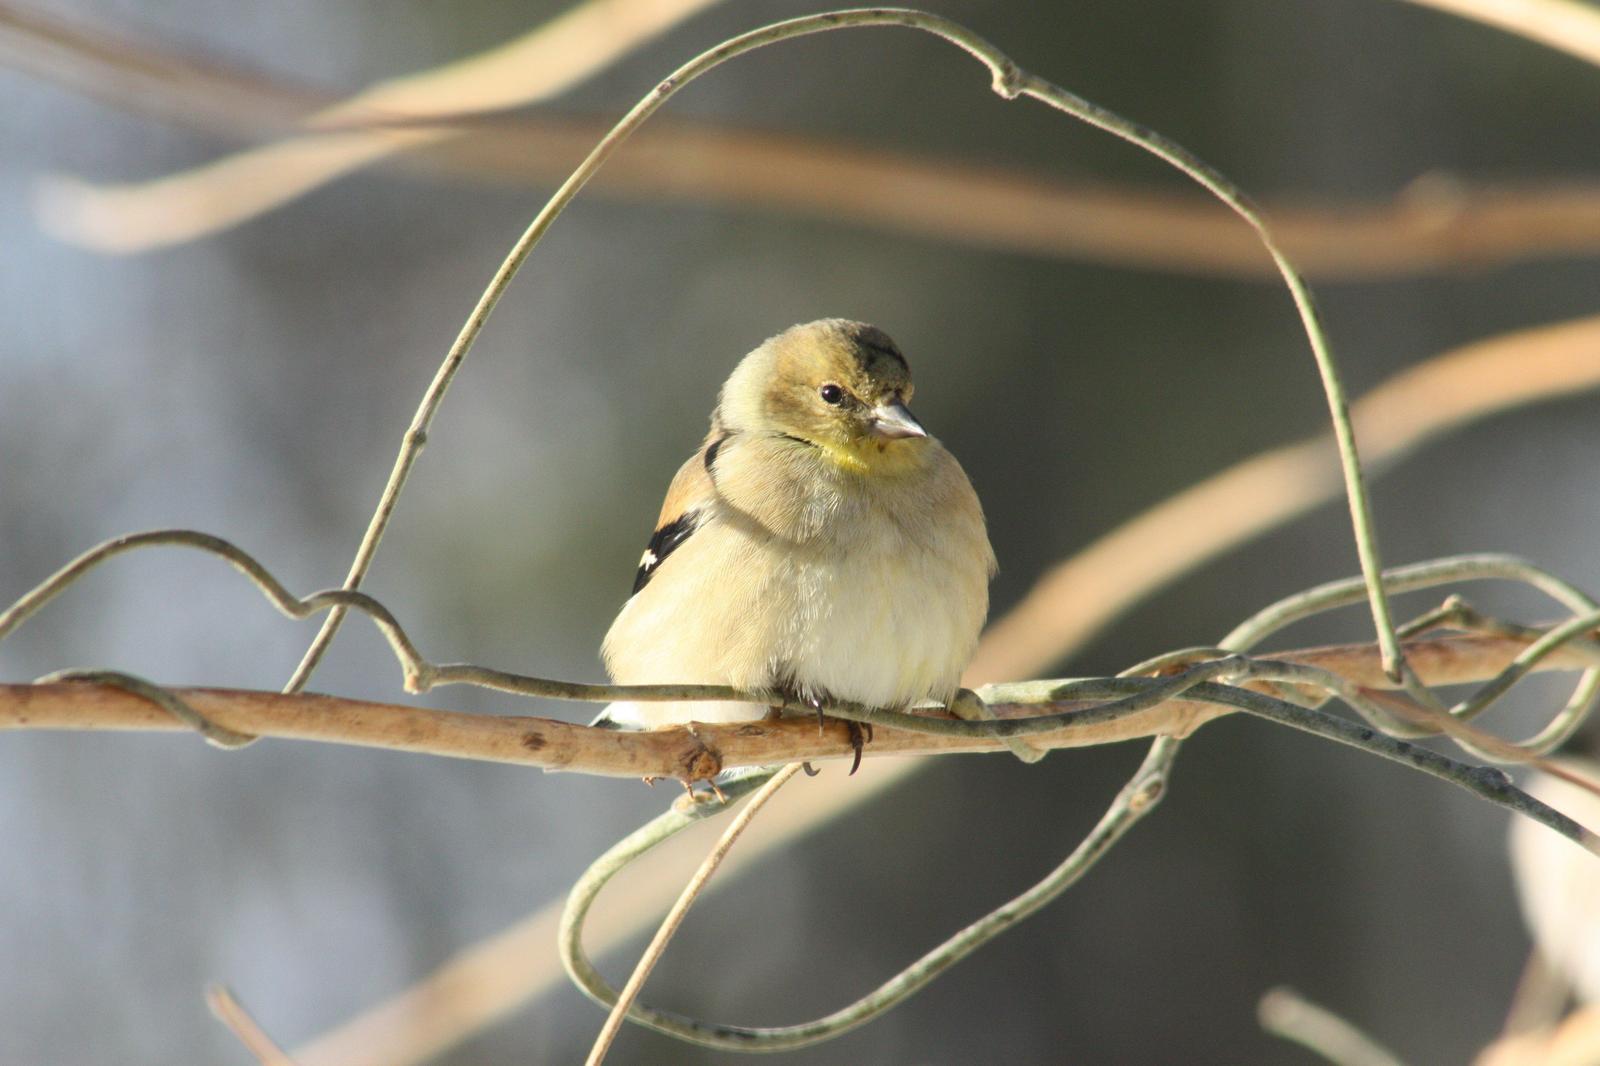 American Goldfinch Photo by Linda Fields